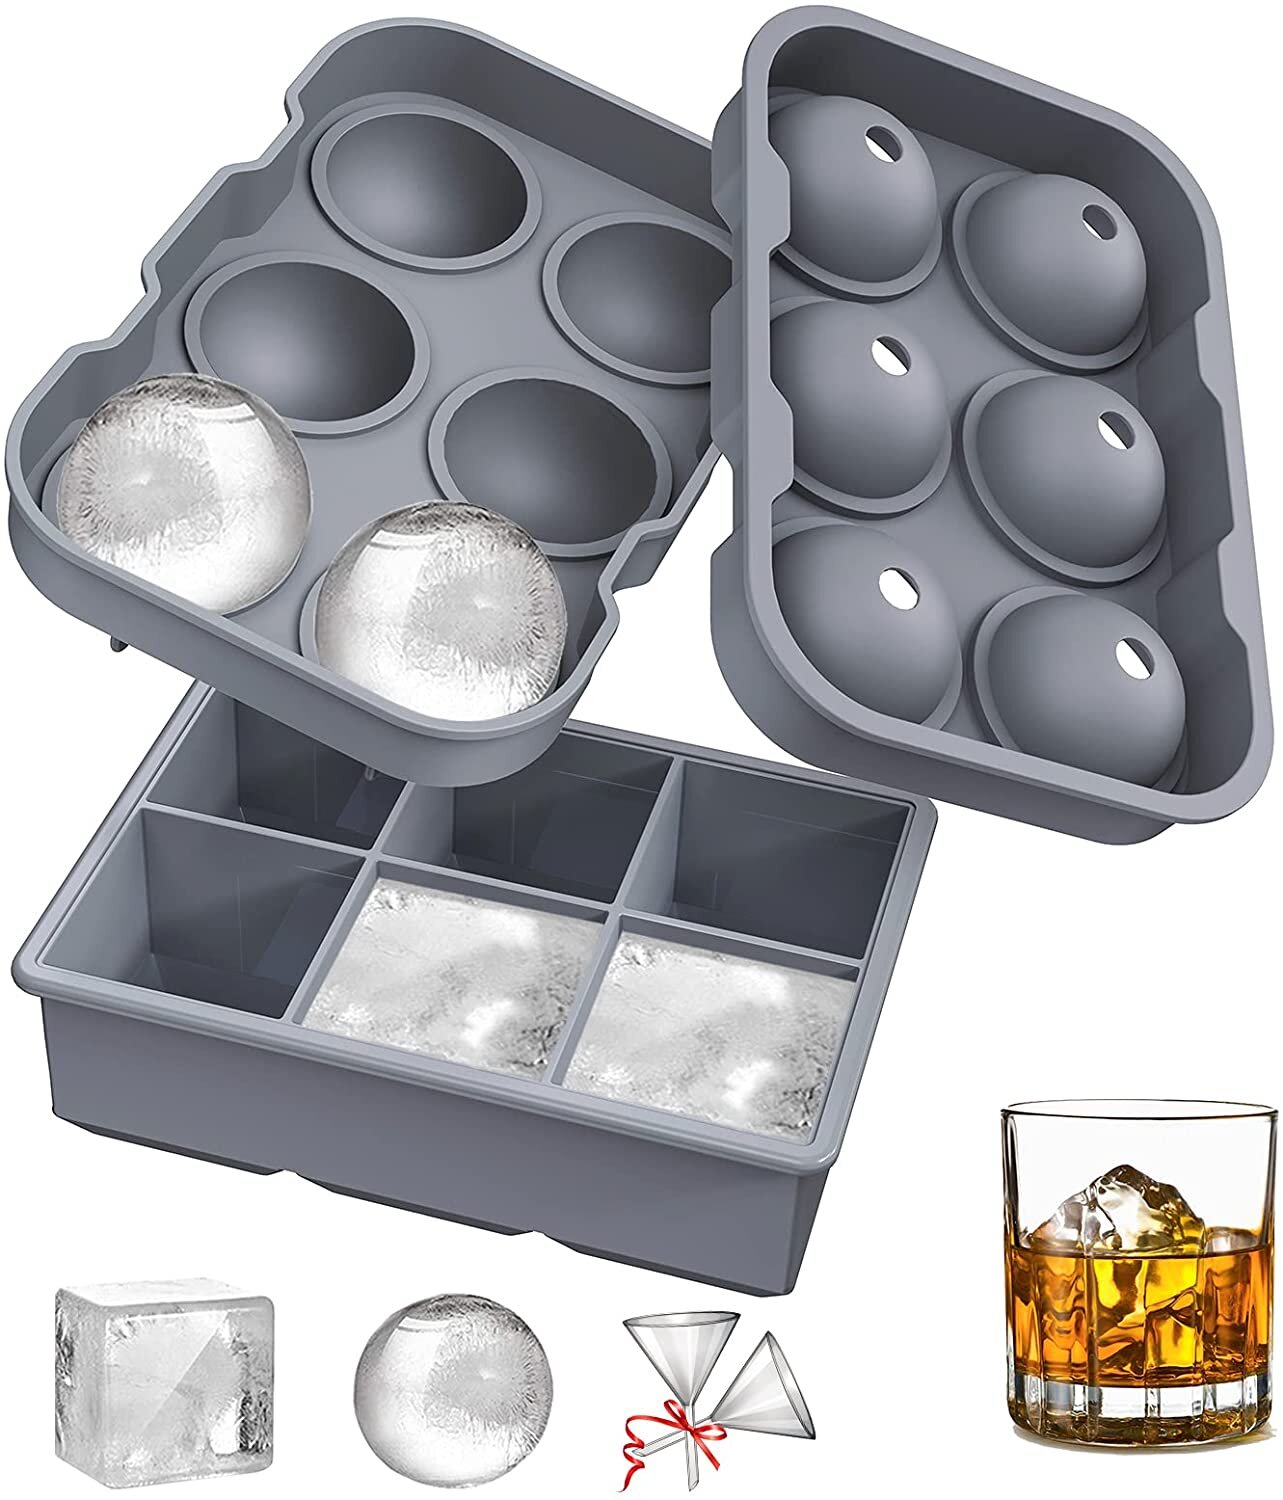 Whiskey or Other Beverages 1Pcs Green Cocktails 24 ice Trays Does not Contain BPA Durable and Easy to Release Silicone ice Cube Trays with lid Water for Beverages